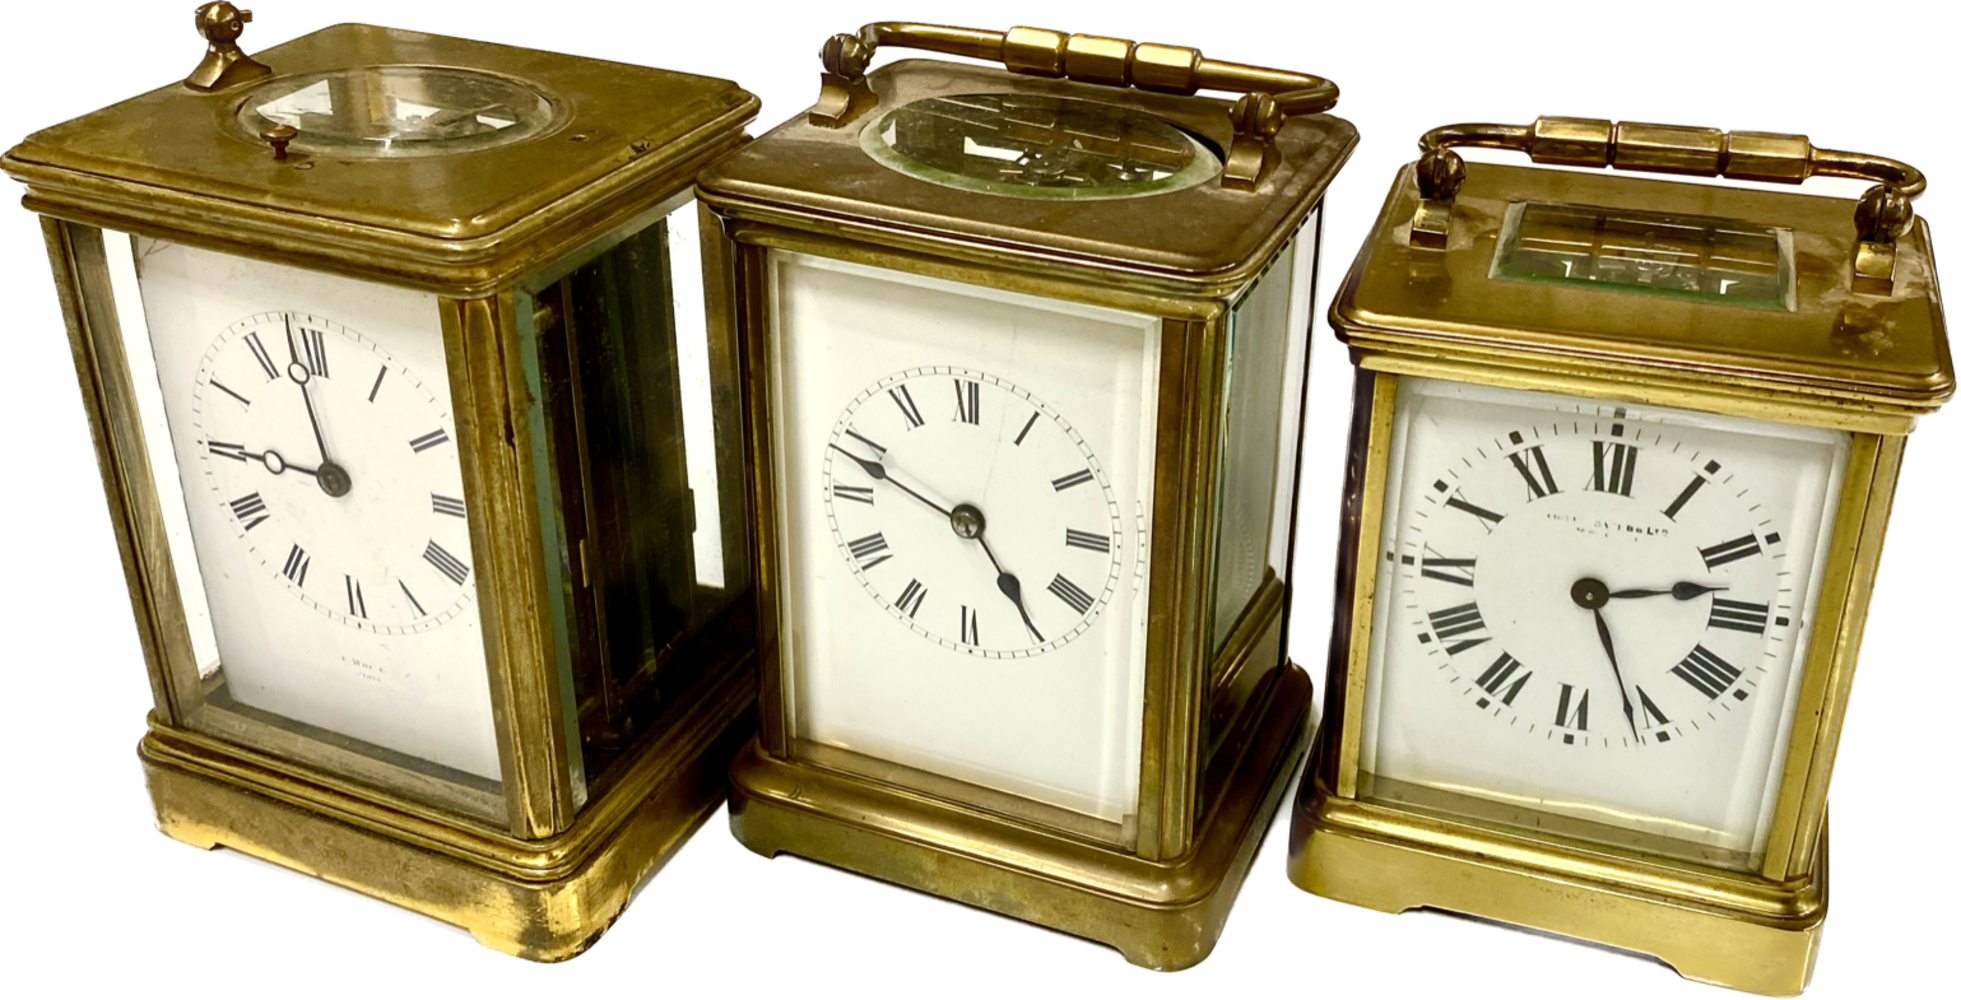 The Monday Sale - Saleroom 5 - To Include a Horologist’s collection of clocks, clock parts & accessories, direct from a local deceased estate